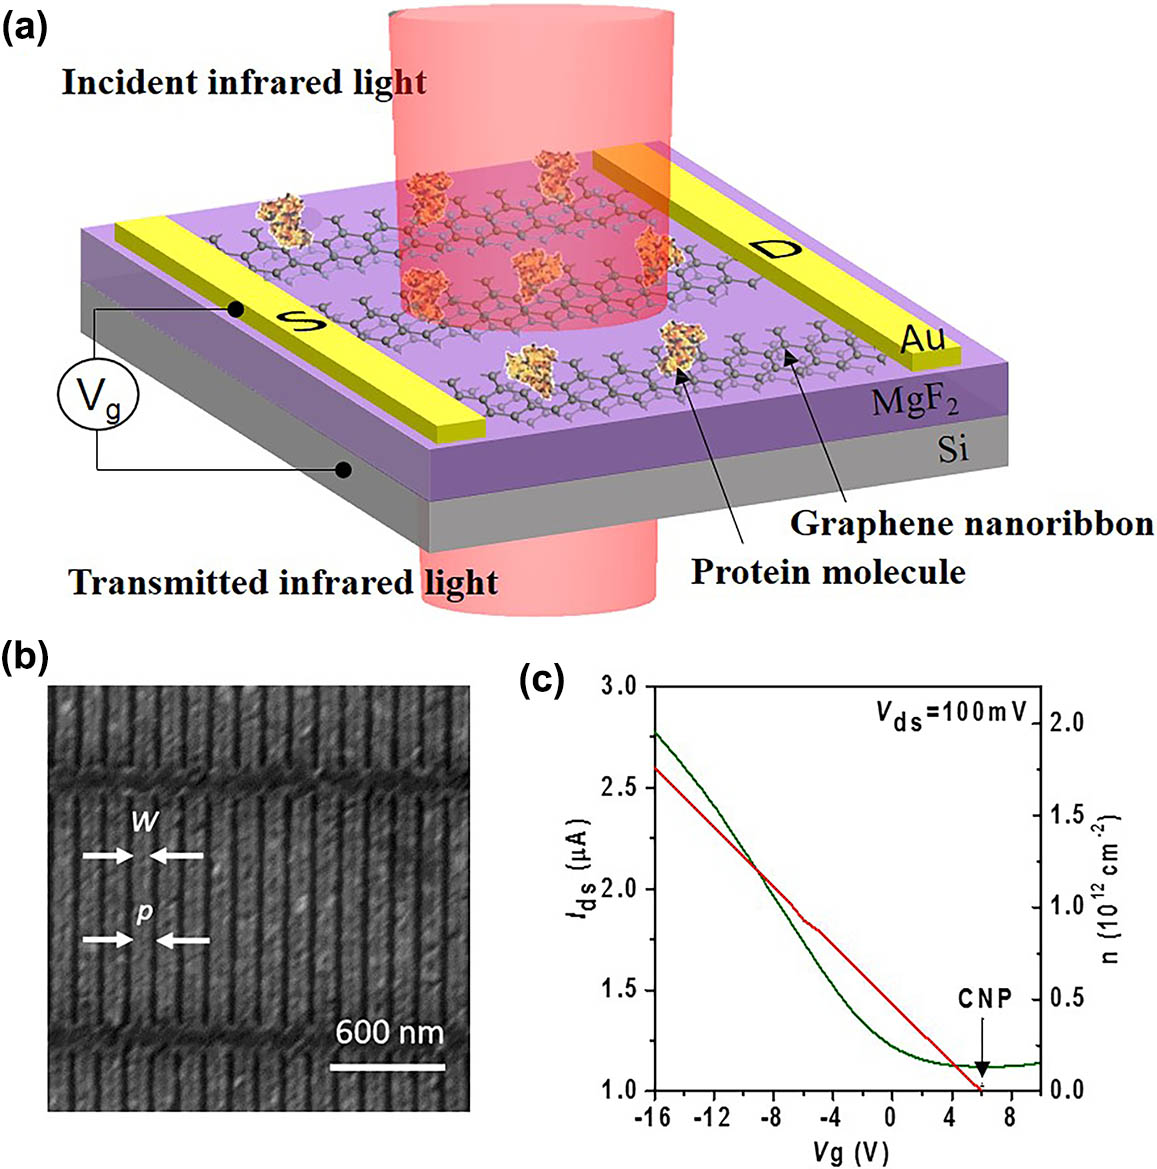 Graphene plasmon biosensor. (a) Schematic of the graphene plasmon sensor. Monolayer protein was deposited on top of the GNR array fabricated on 700 nm thick MgF2 supported on Si substrate. Incident IR light excites plasmon resonance across the GNR: S, source; D, drain. (b) SEM image of a GNR array with a ribbon width (W) of 100 nm and a period width (P) of 140 nm. (c) The electric transfer curve (green curve) and carrier density (red line) of the double layered graphene/MgF2 sensor. The black arrow is the CNP.